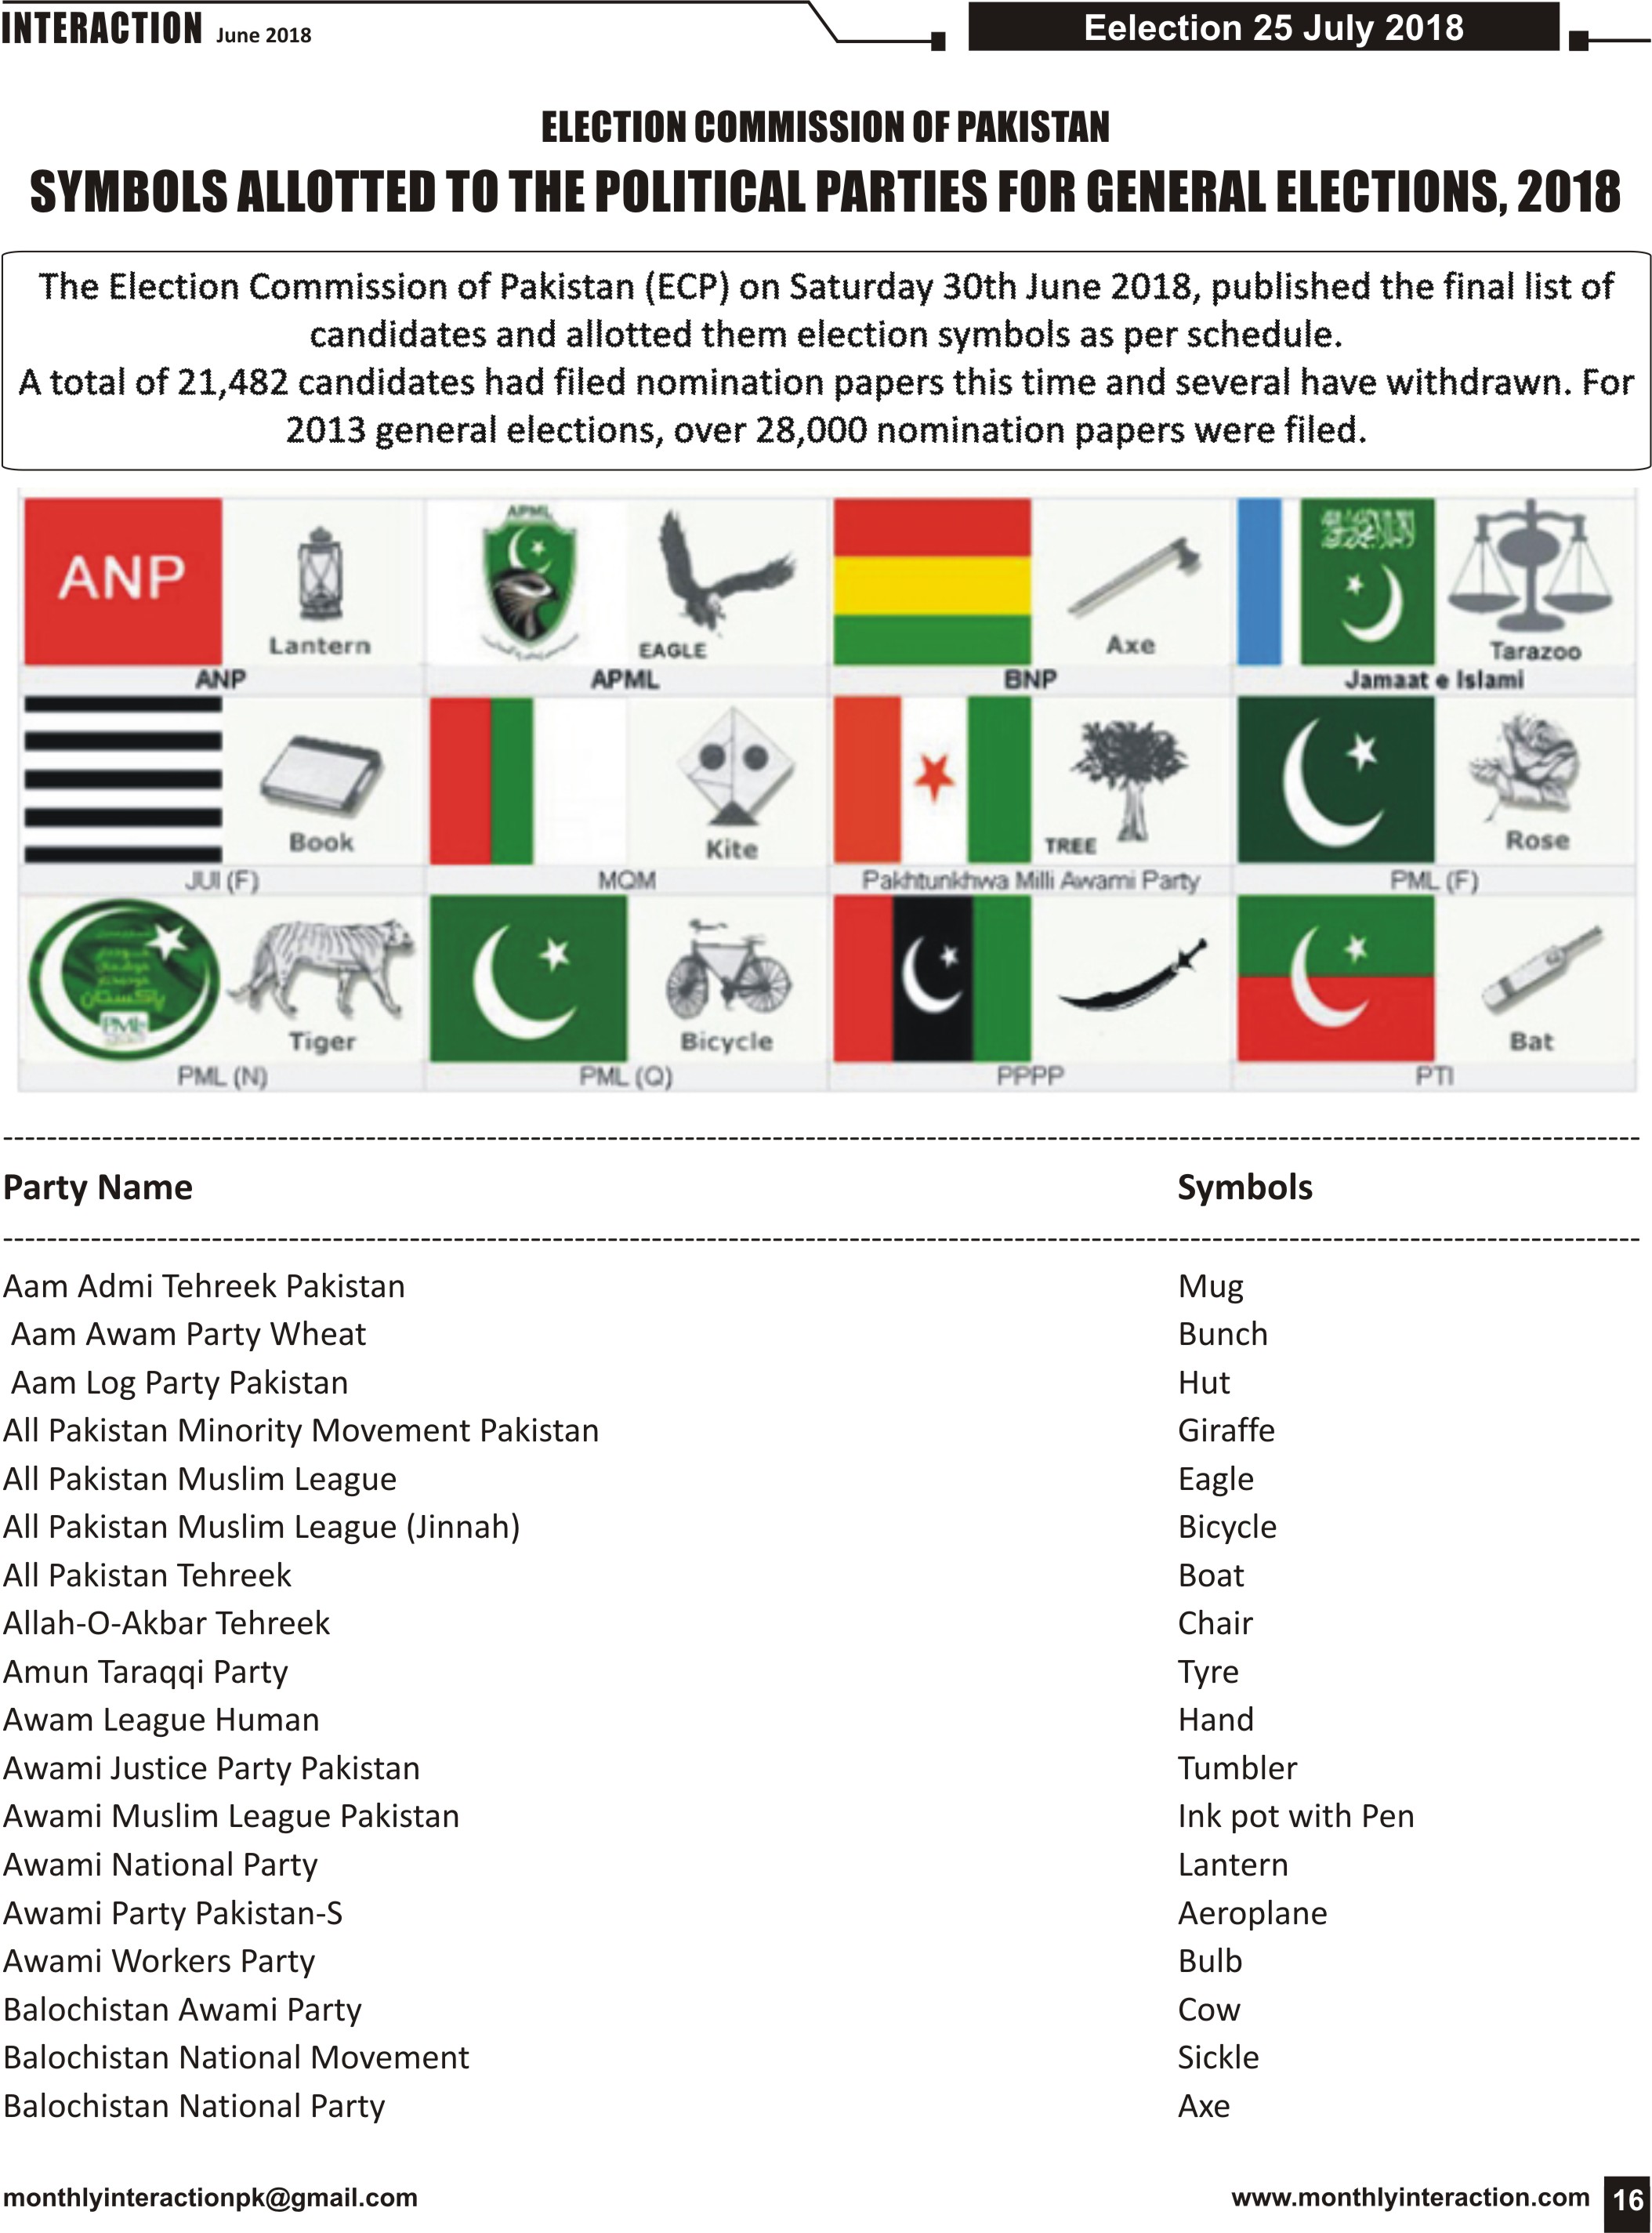 ELECTION COMMISSION OF PAKISTAN SYMBOLS ALLOTTED TO THE POLITICAL